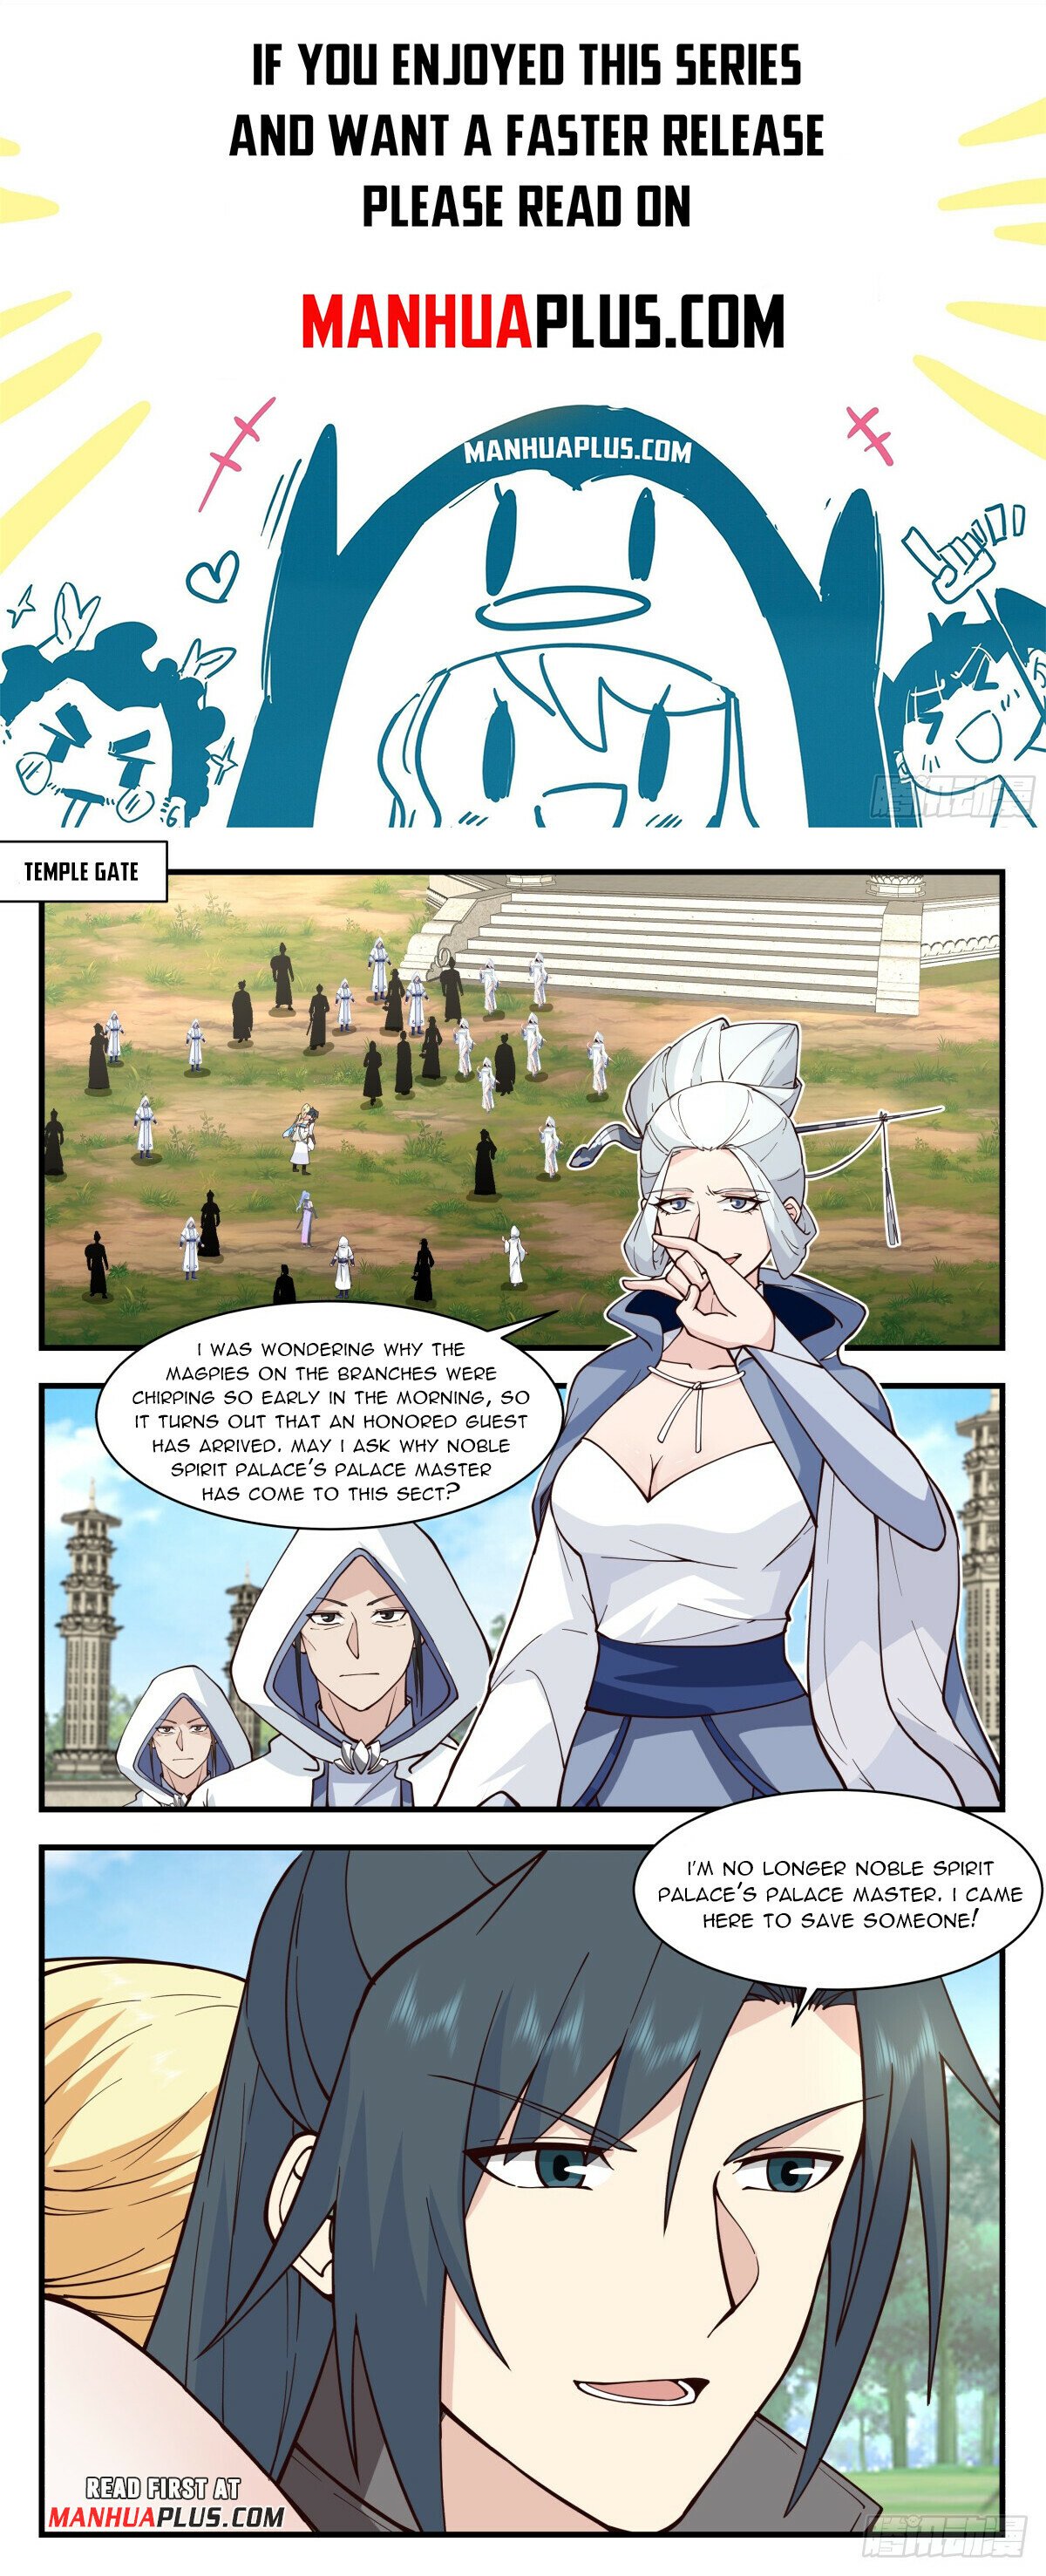 Martial Peak - Chapter 21802 - Only Obey One Person - Image 1